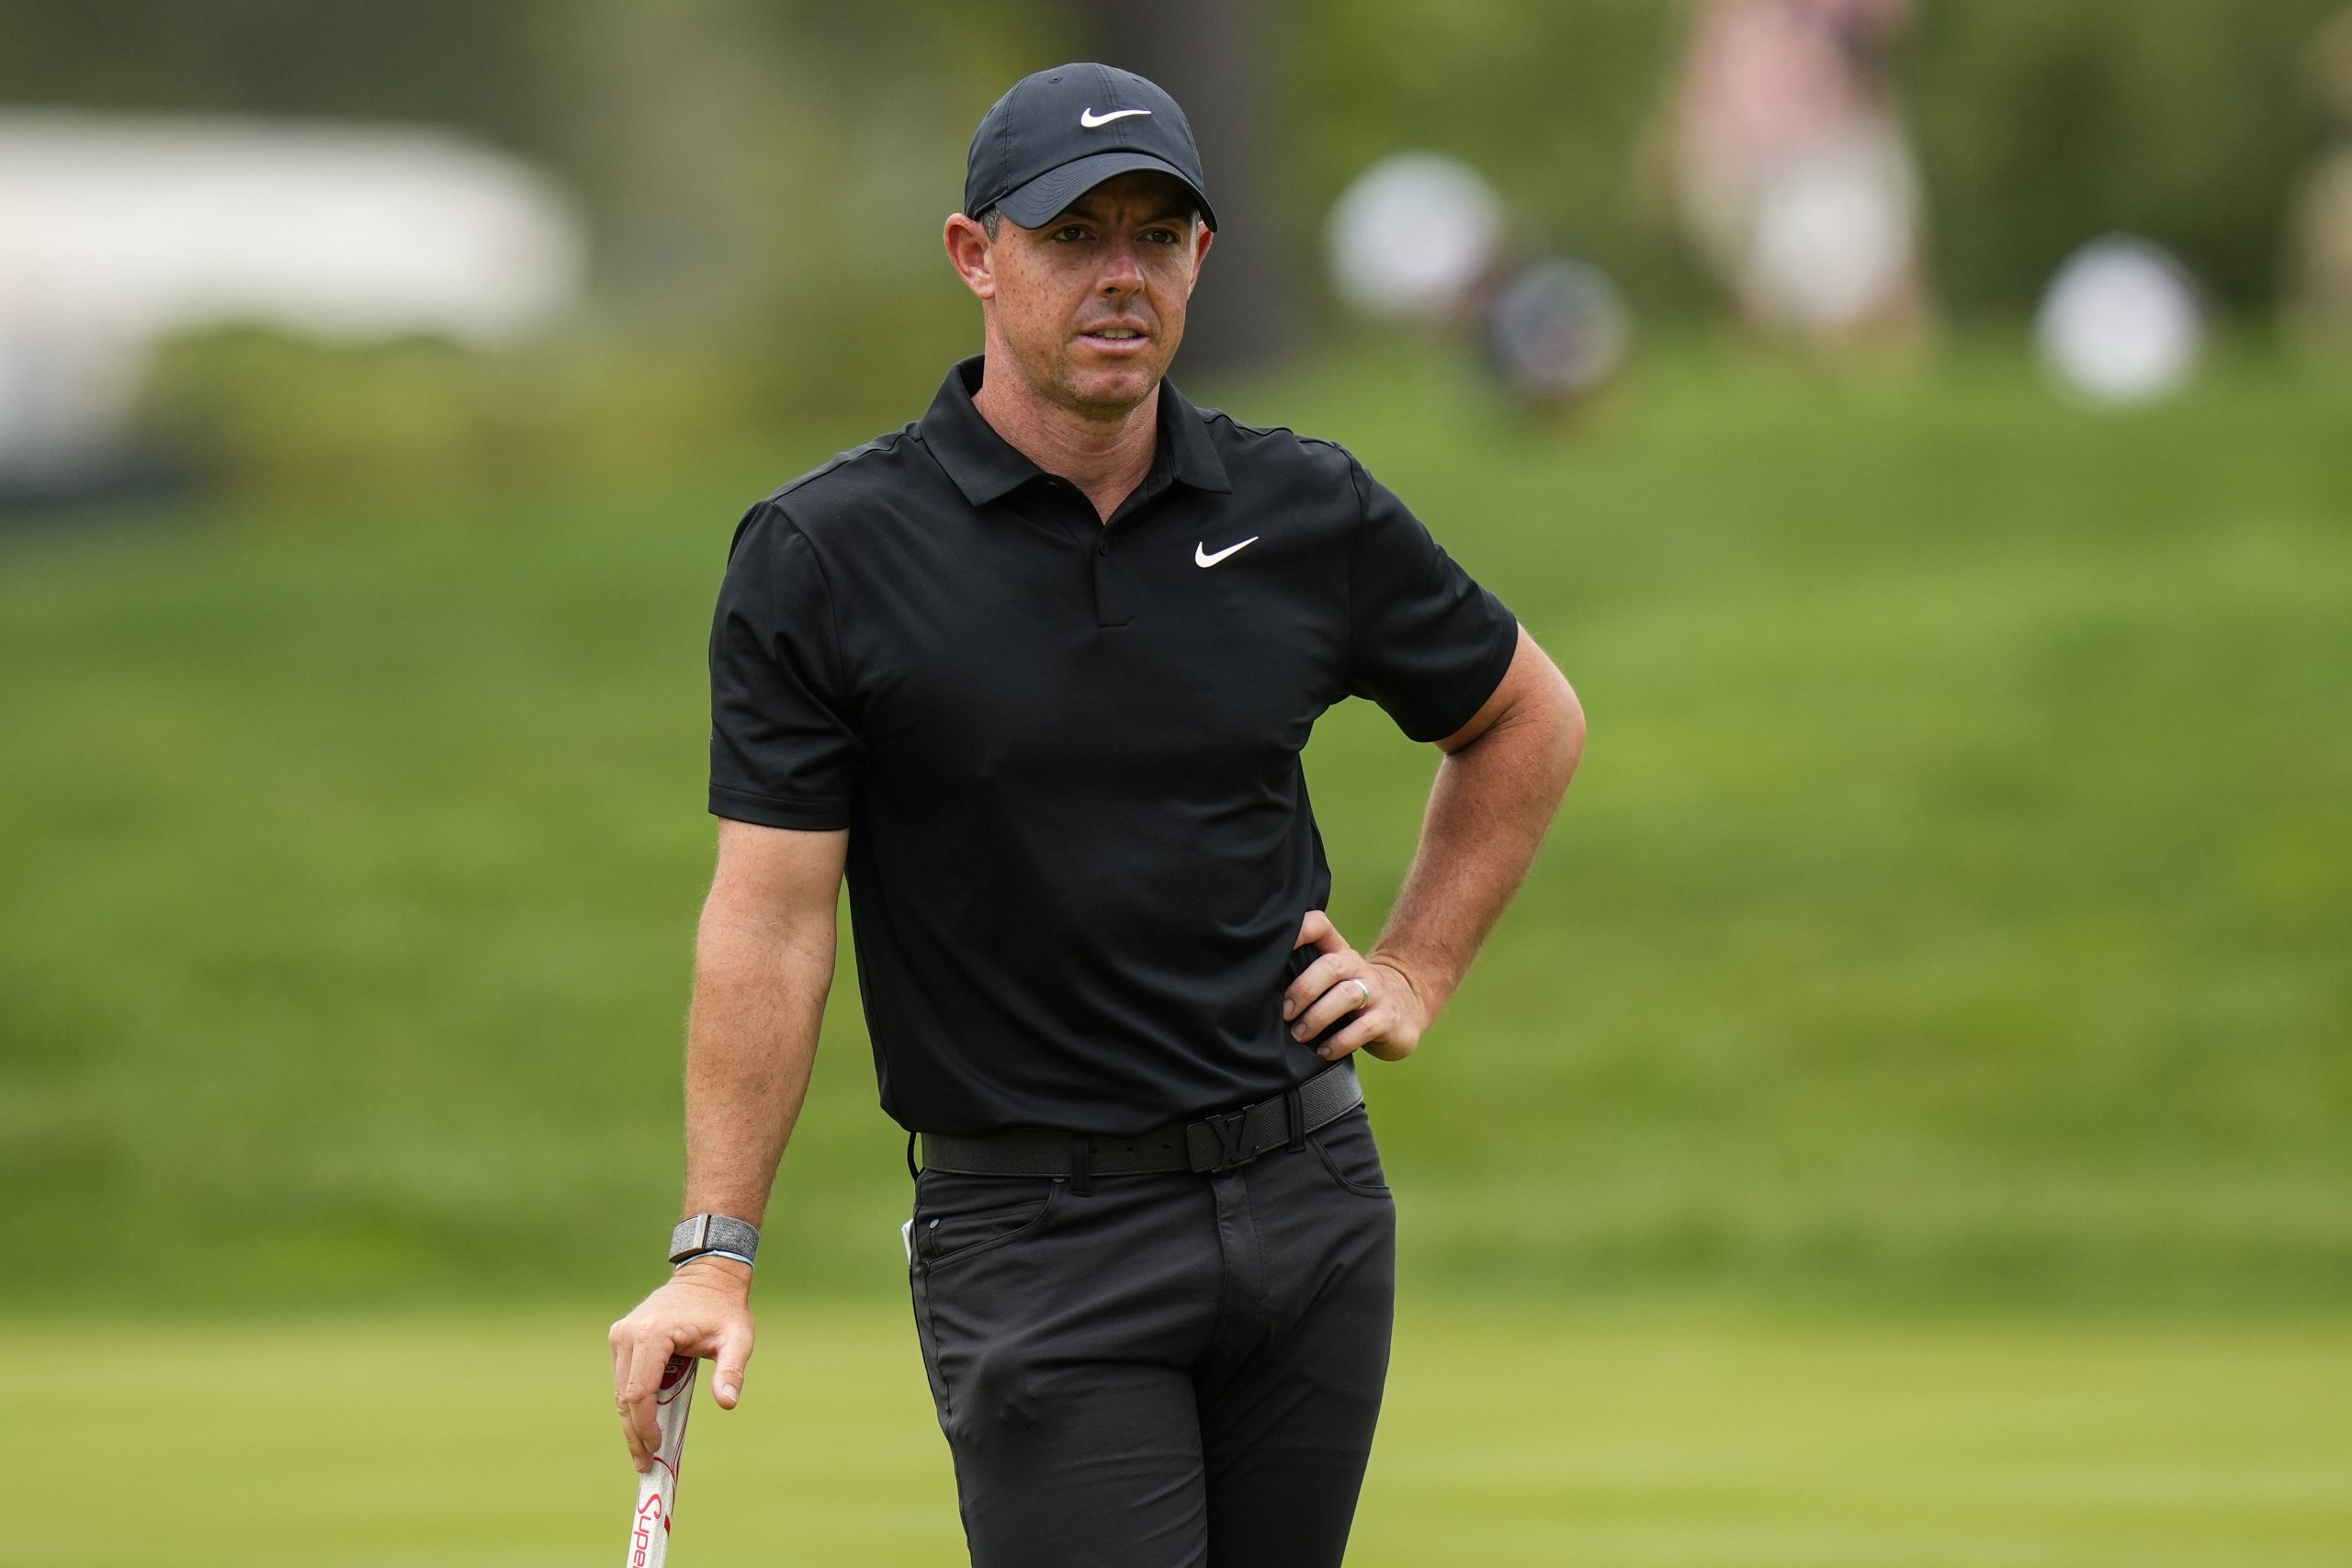 Eighth hole bites back as Rory McIlroy trails record pacesetters